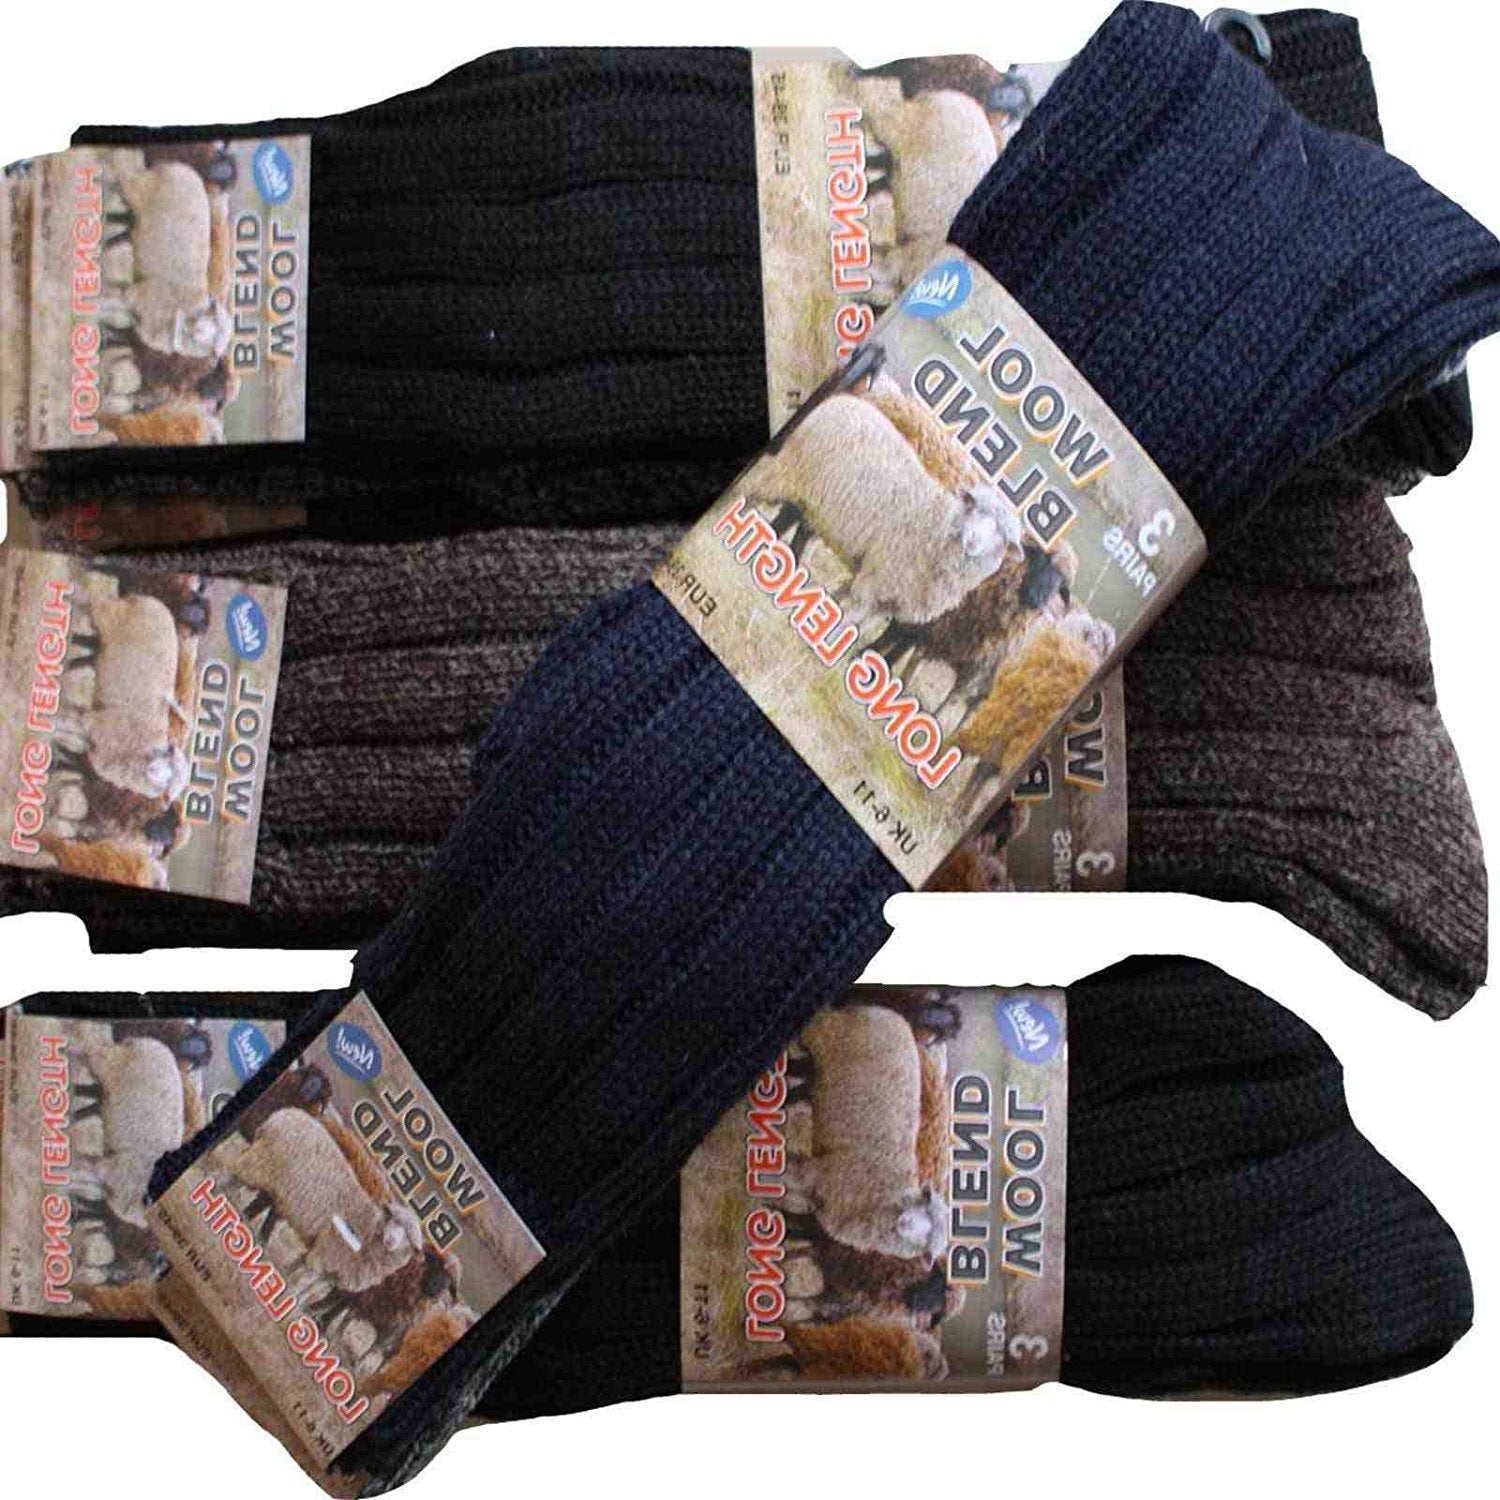 Details about New 3 Pairs Mens Wool Blend Long Length Chunky Boot Thermal Socks 6-11 - hanrattycraftsgifts.co.uk